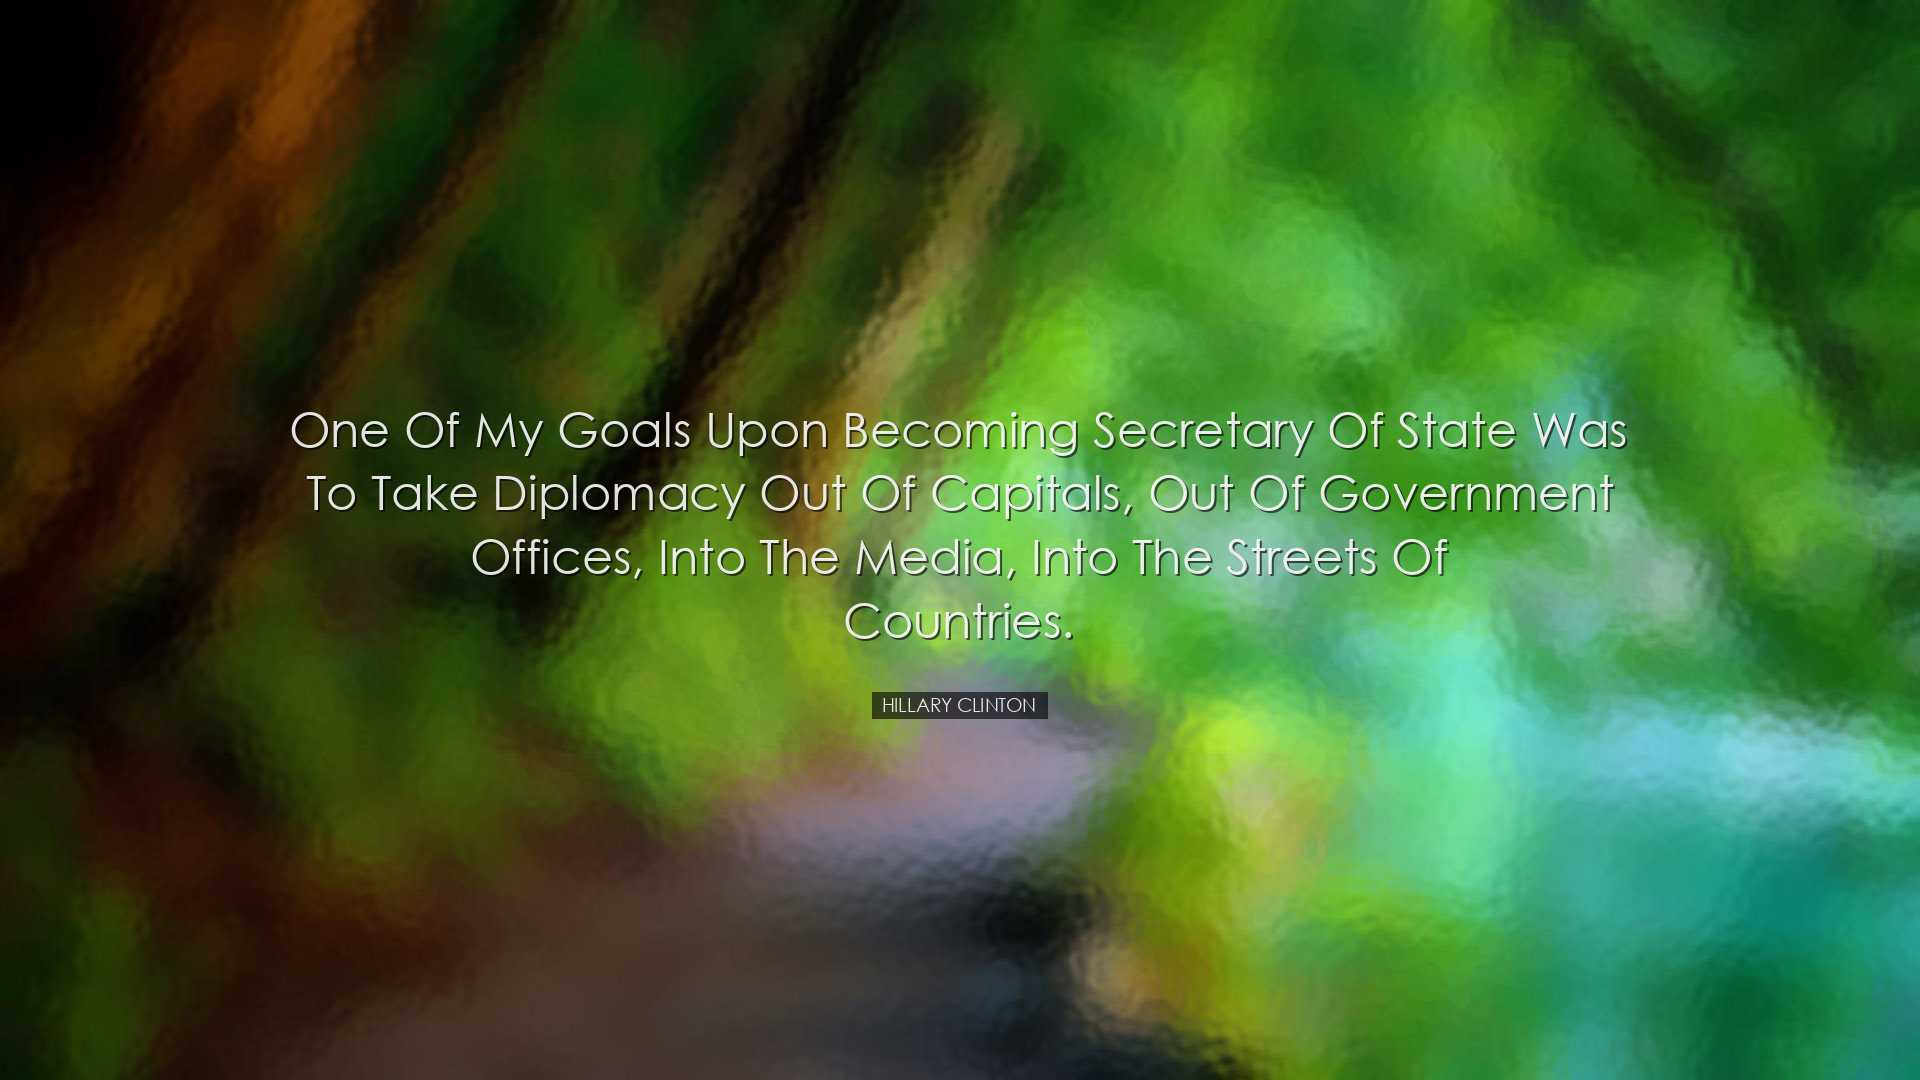 One of my goals upon becoming Secretary of State was to take diplo